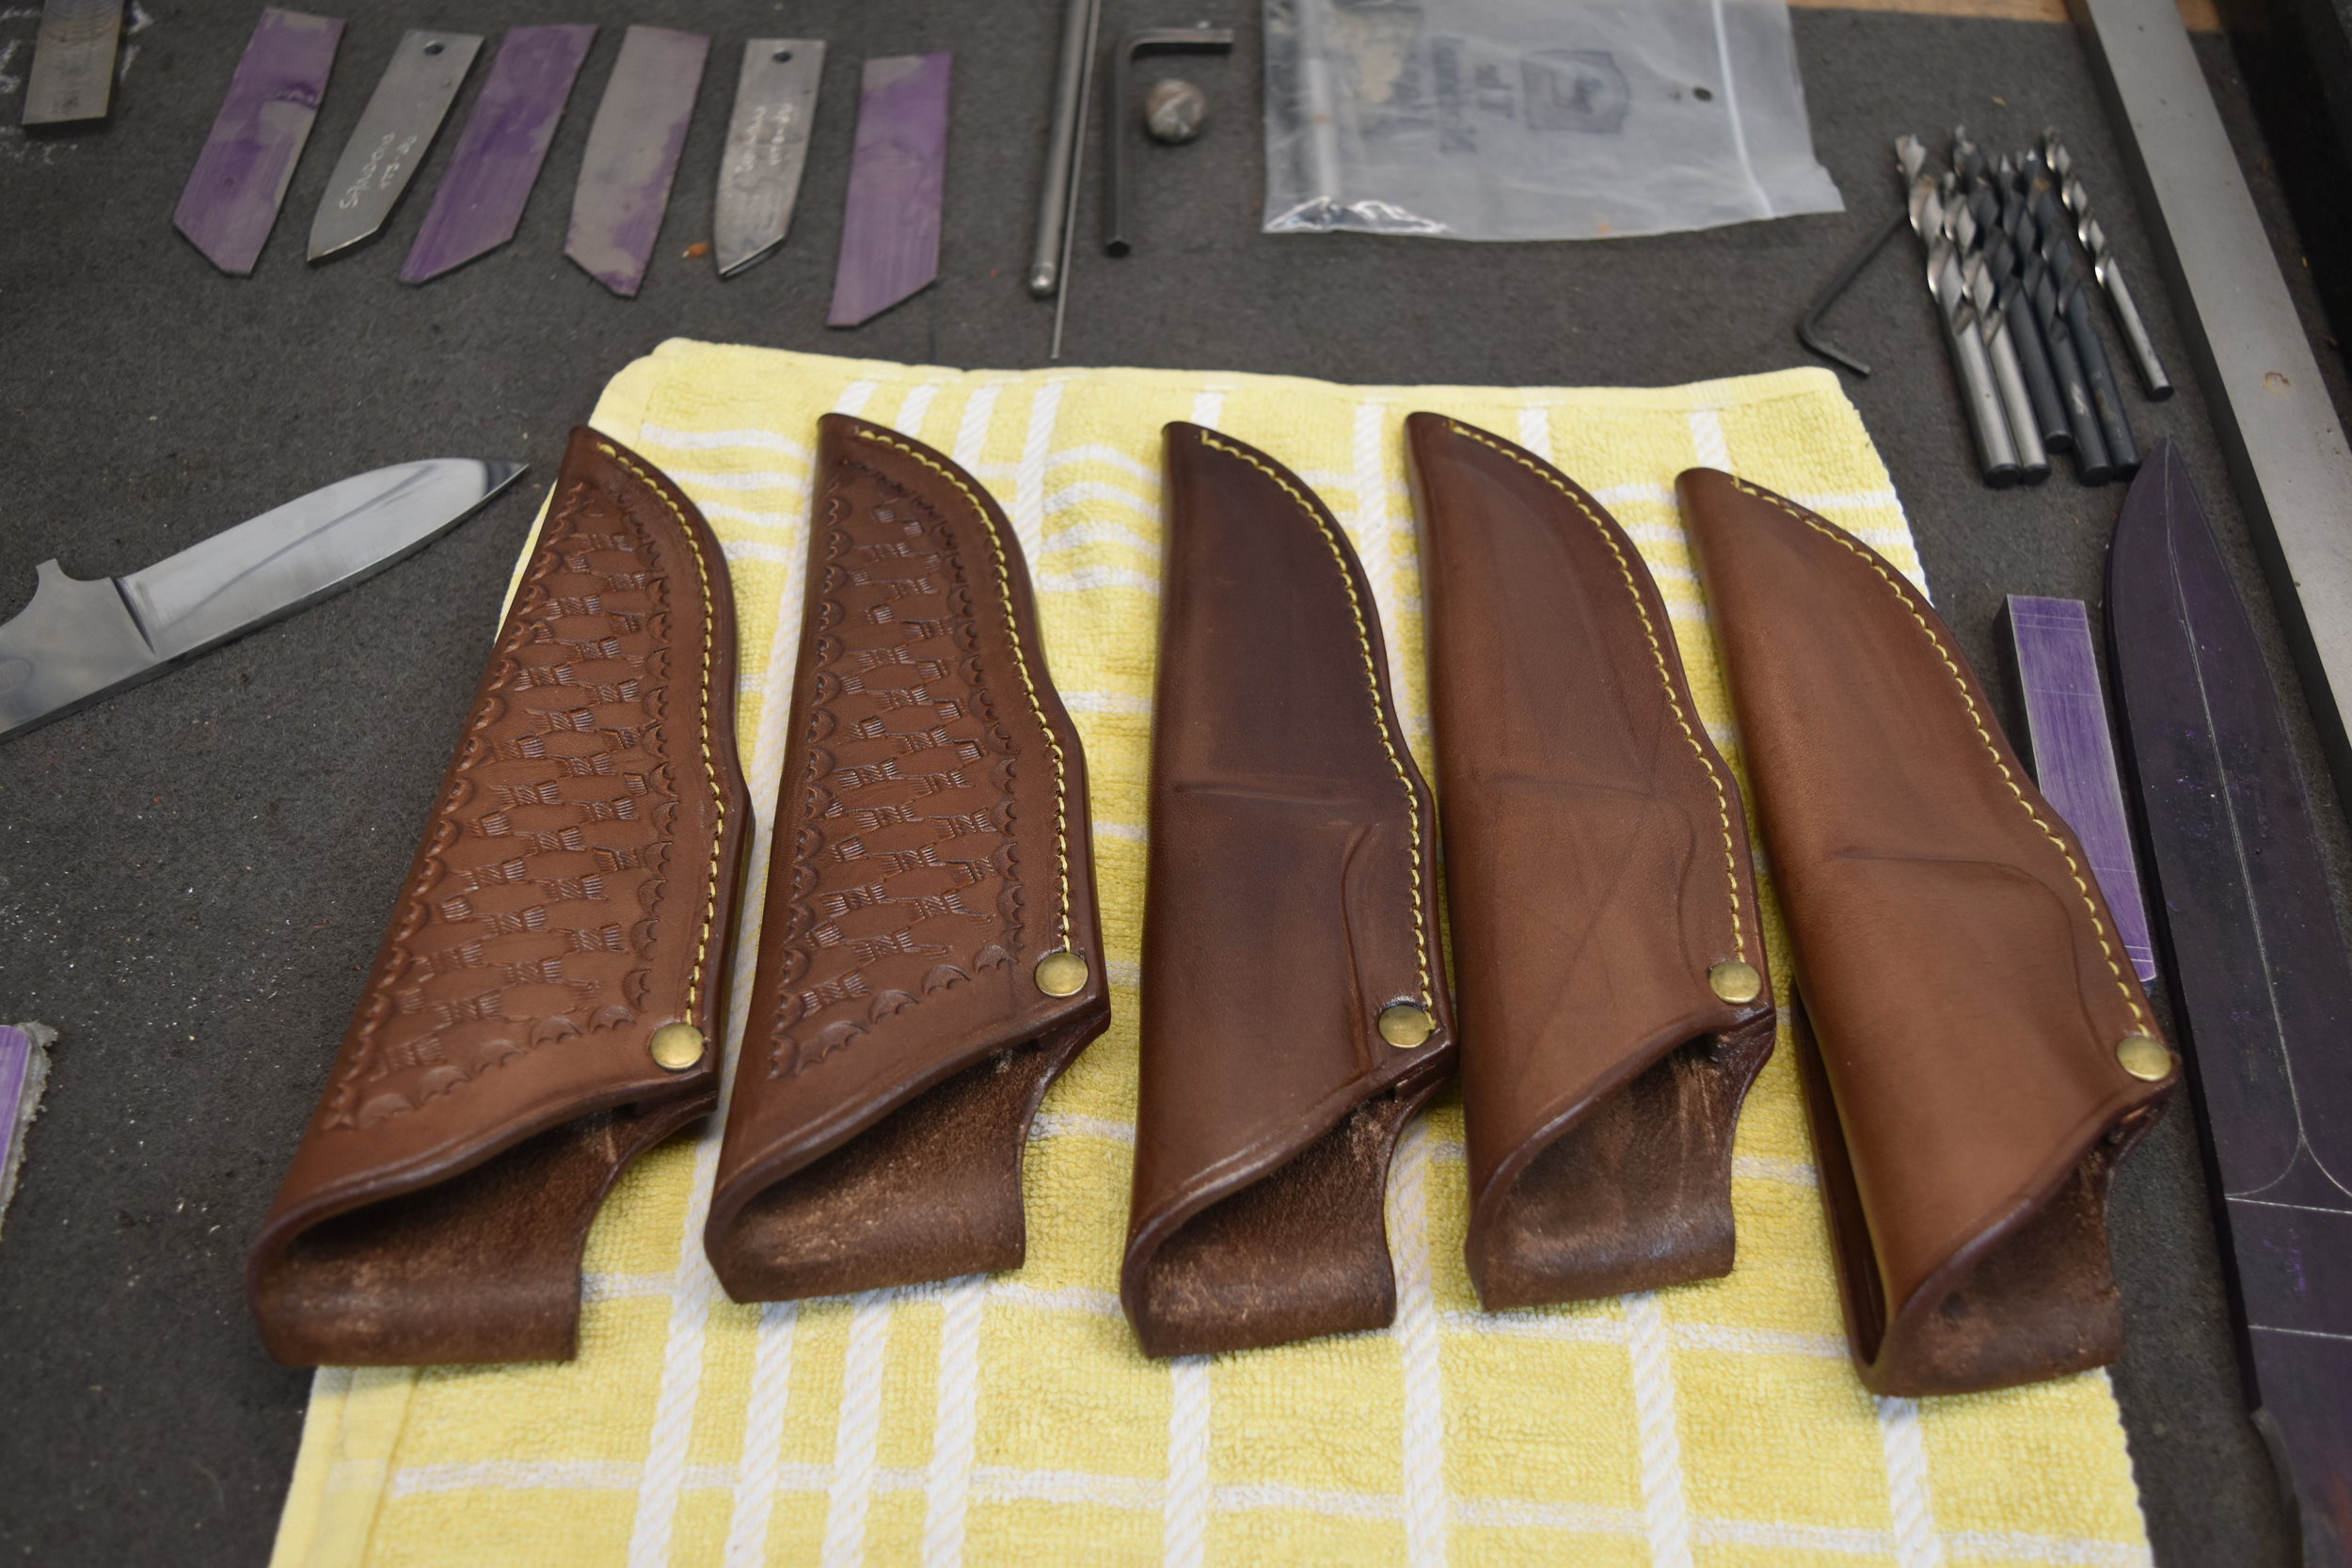 Some of the Auckland-made custom-designed sheaths Brent can provide with his knives